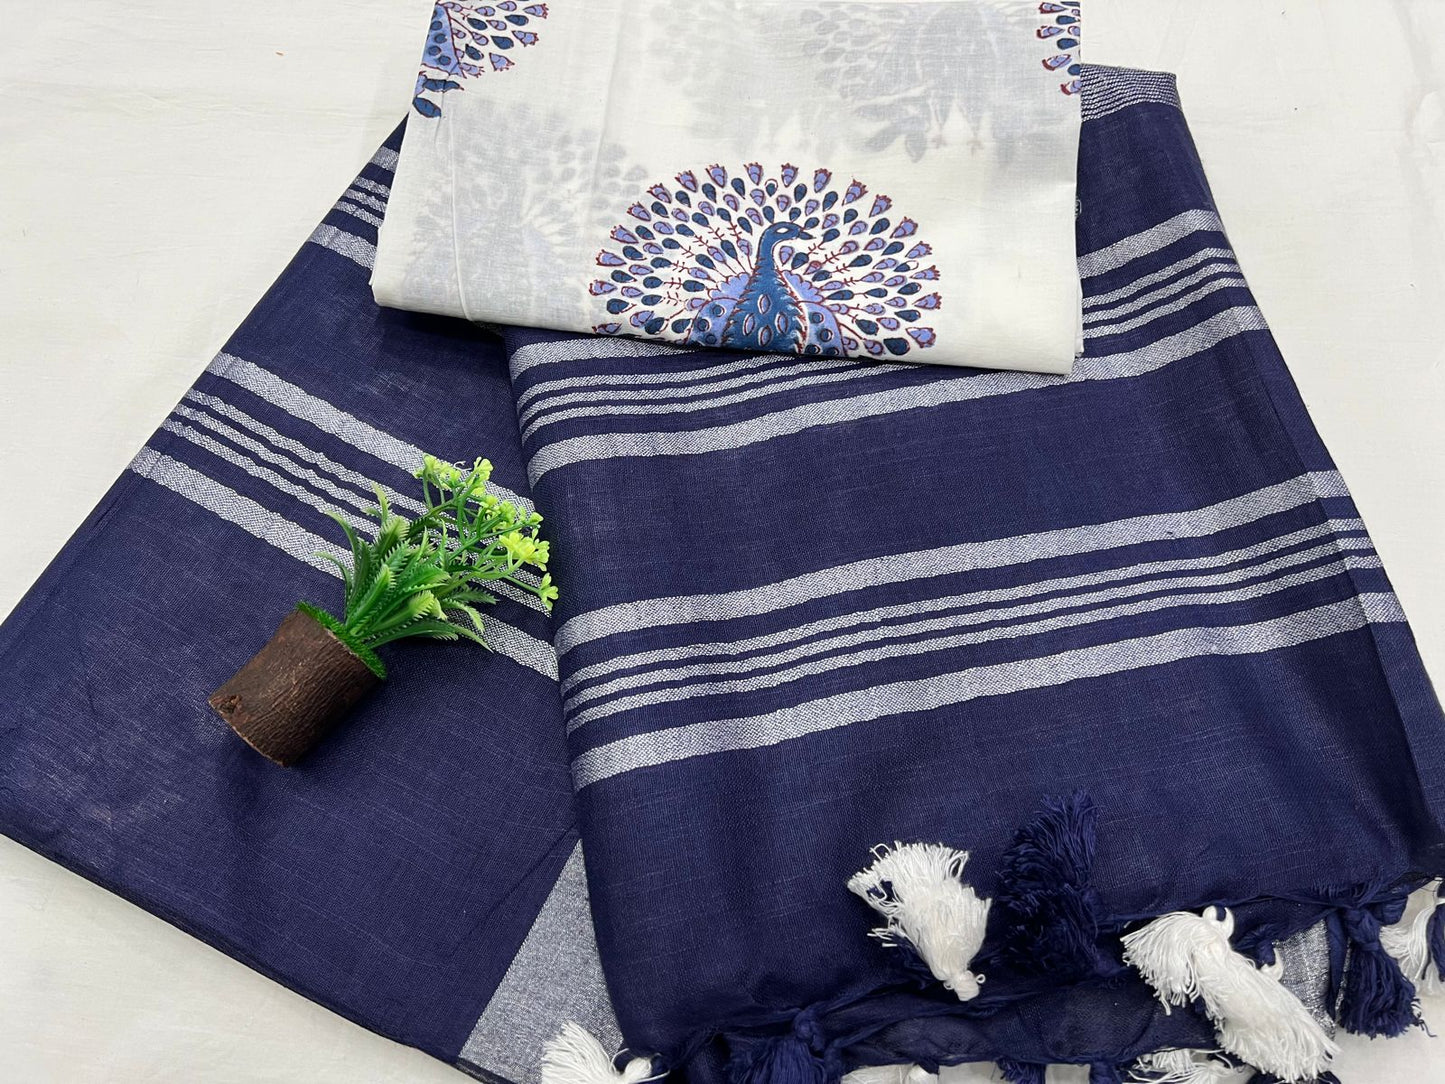 Blue Handloom Cotton linen saree with printed cotton blouse